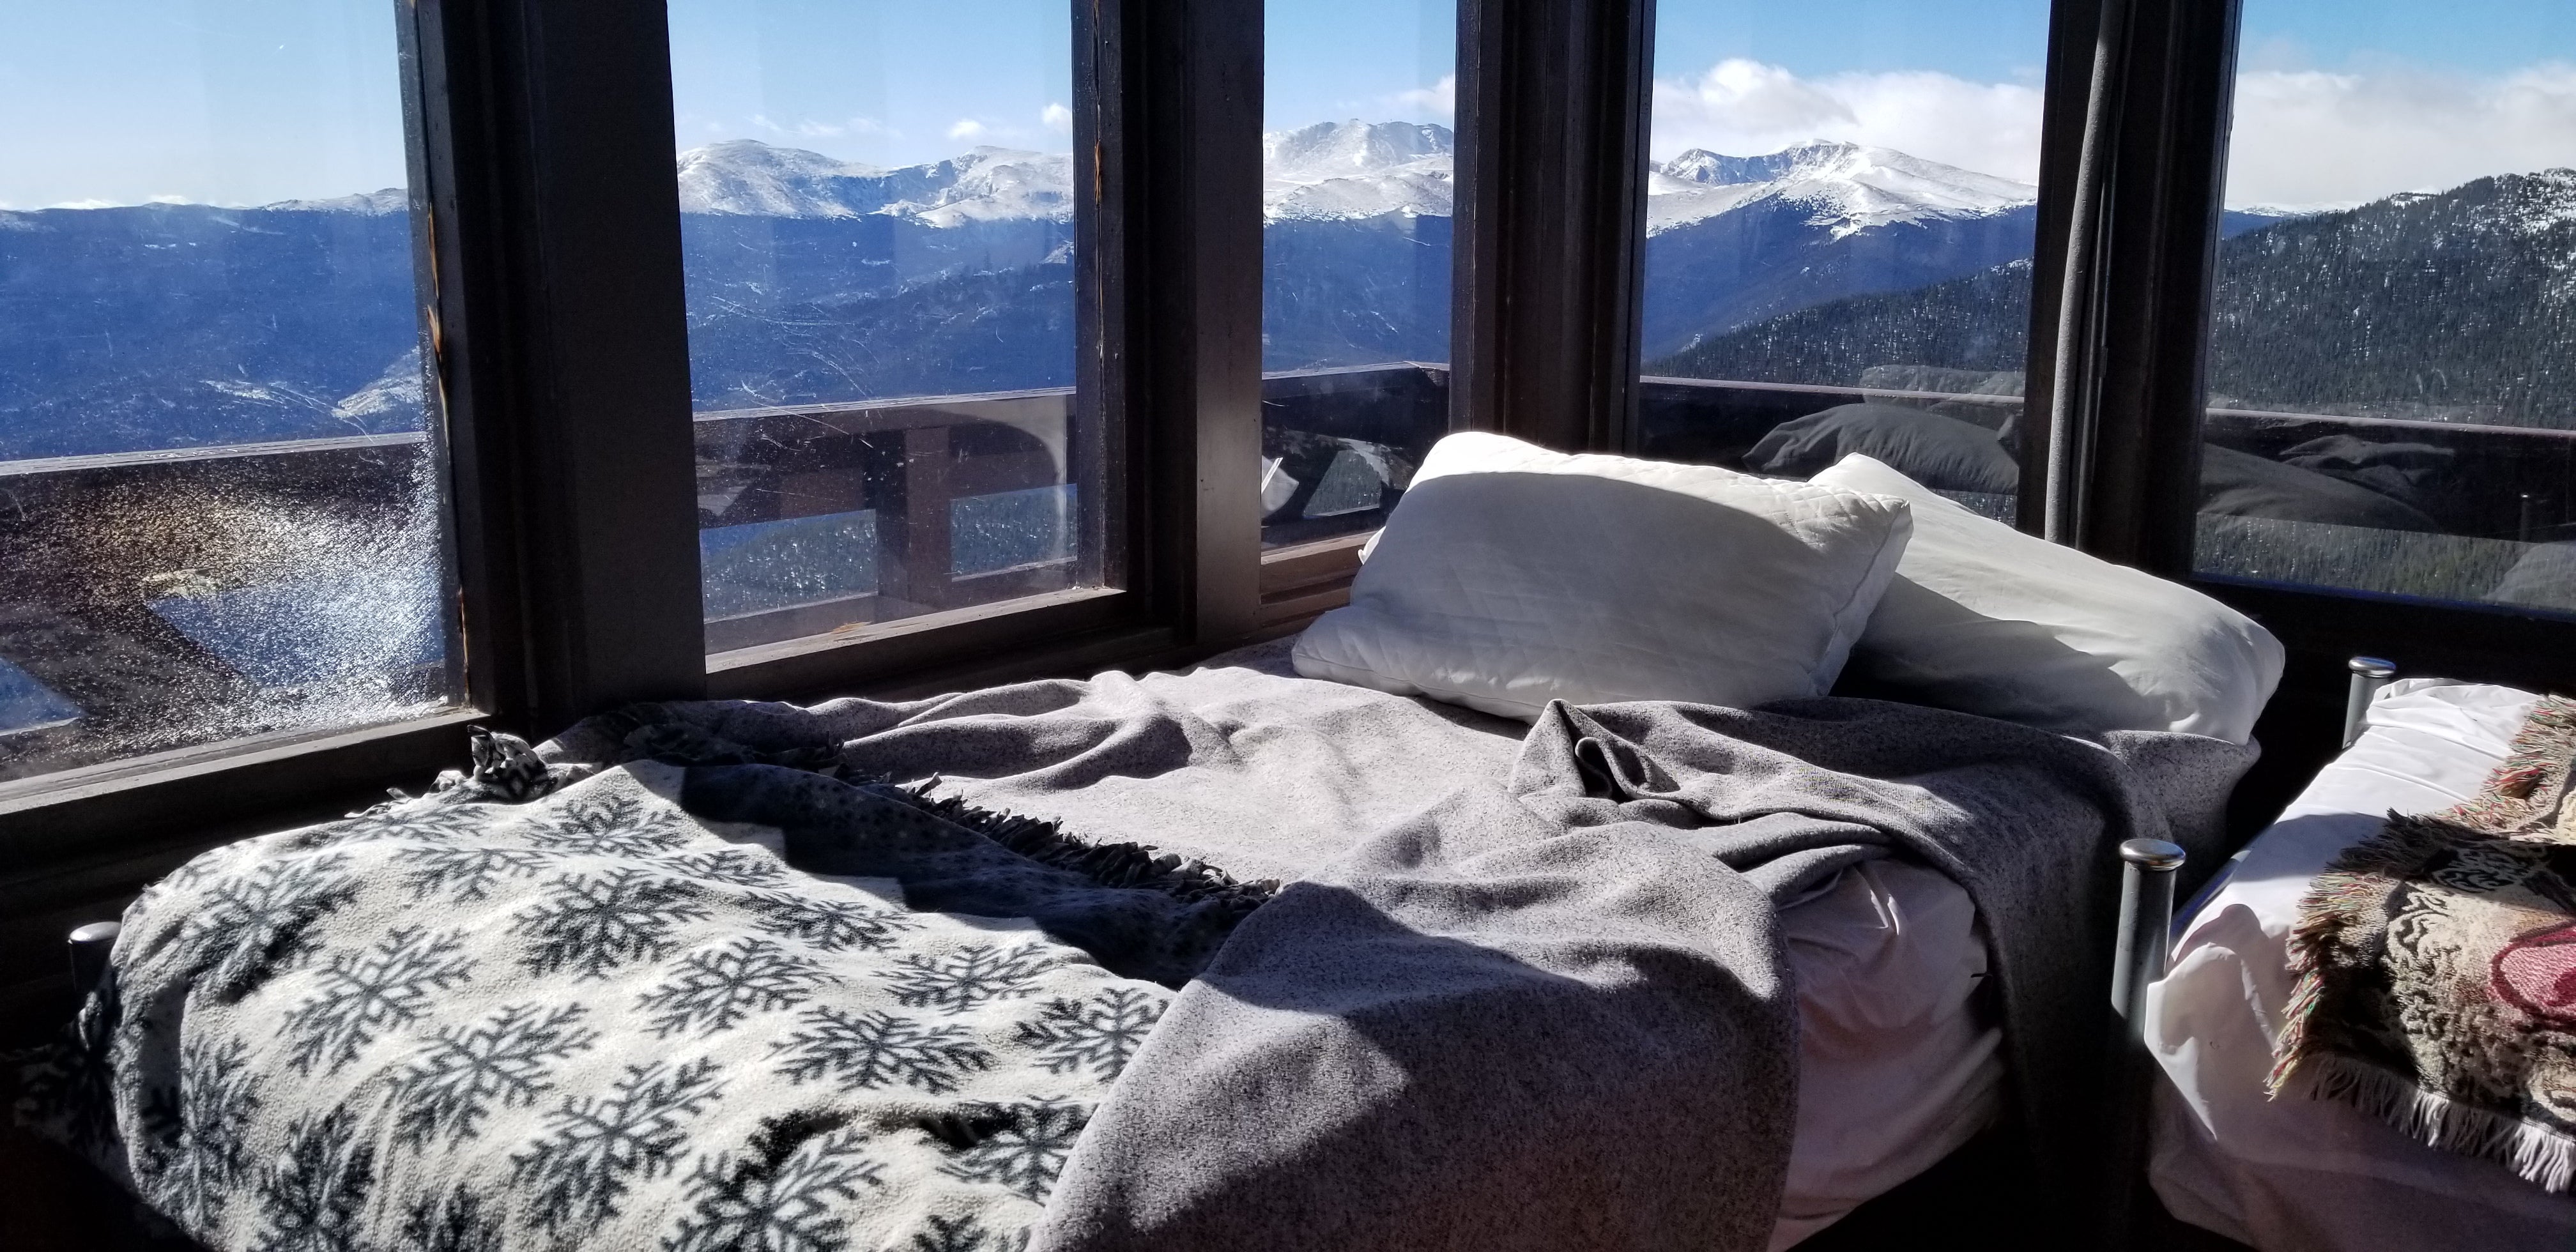 The twin bed and views from the upper floor